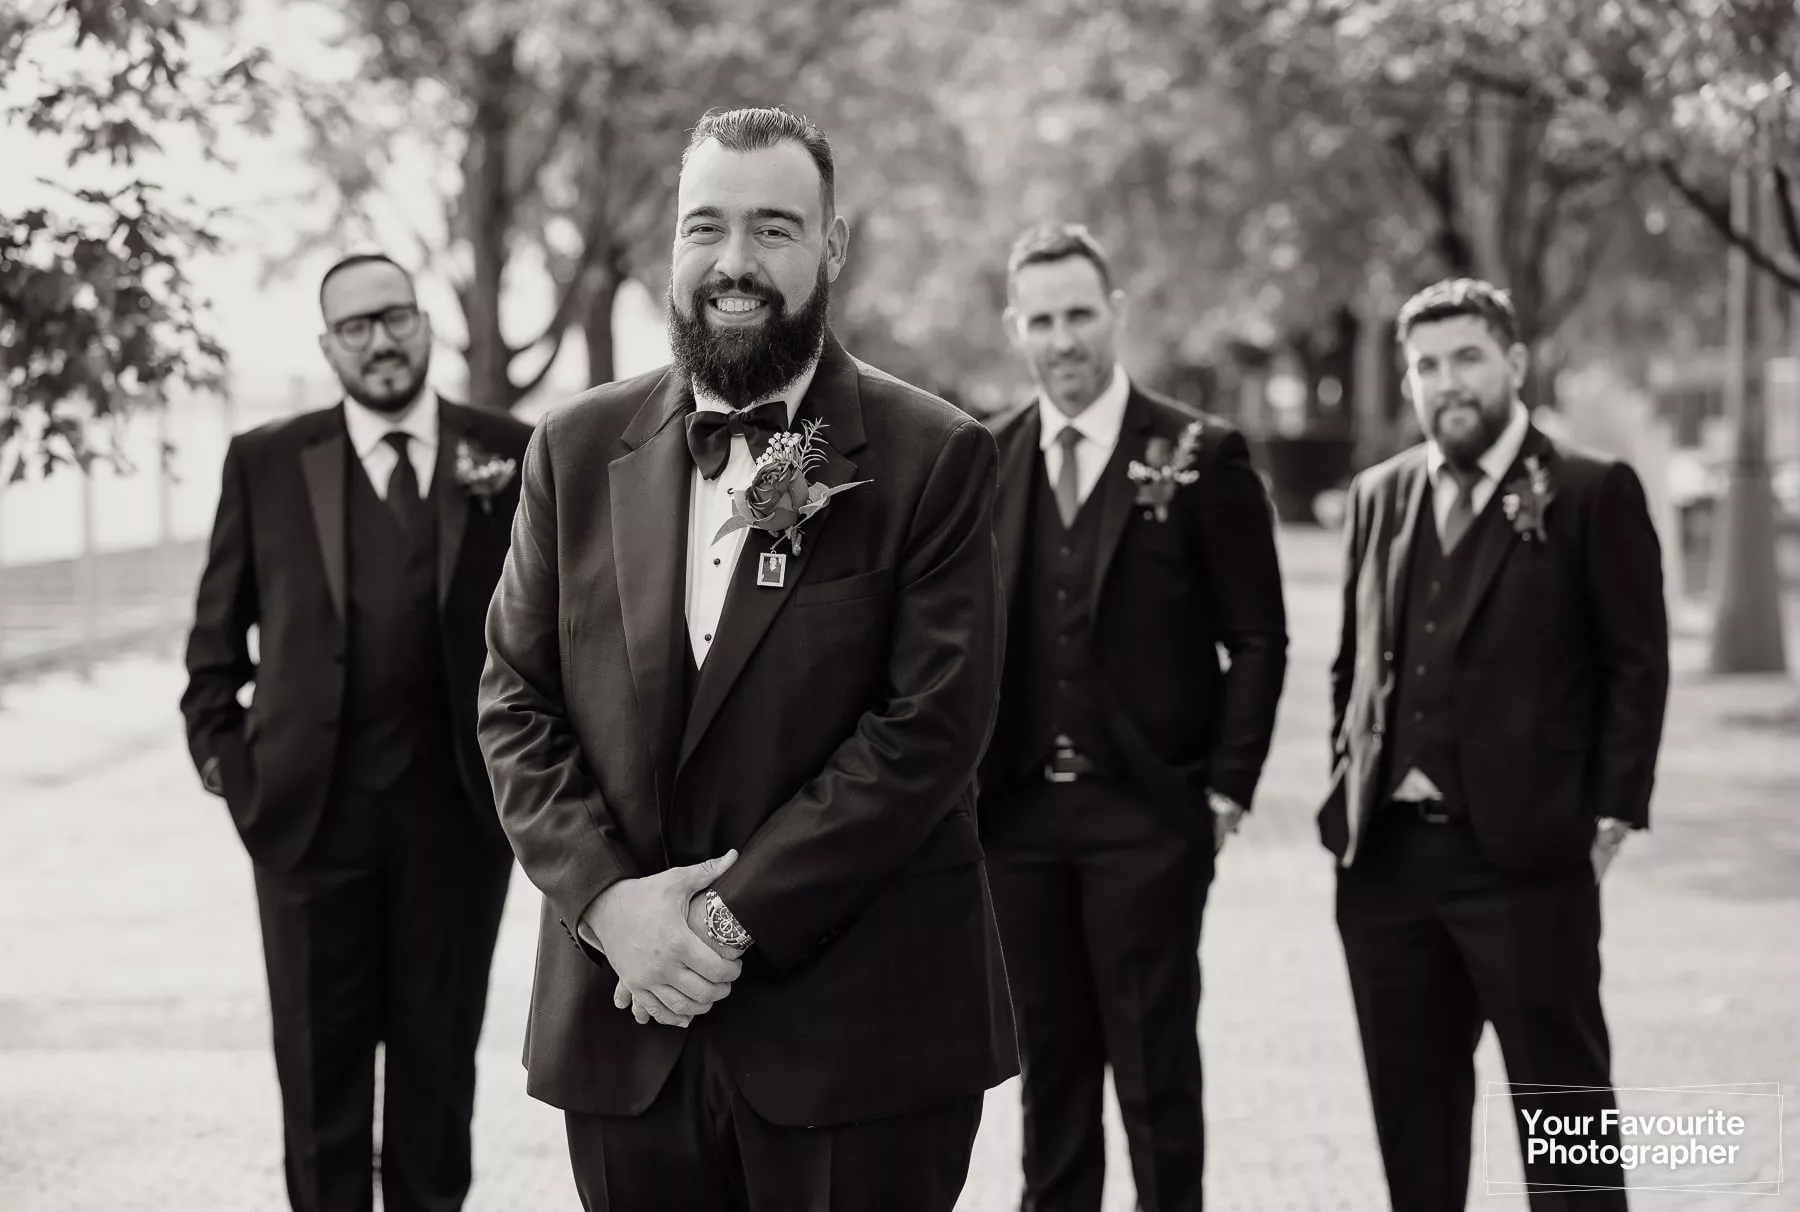 Black and white photo of a groom with his groomsmen in the background